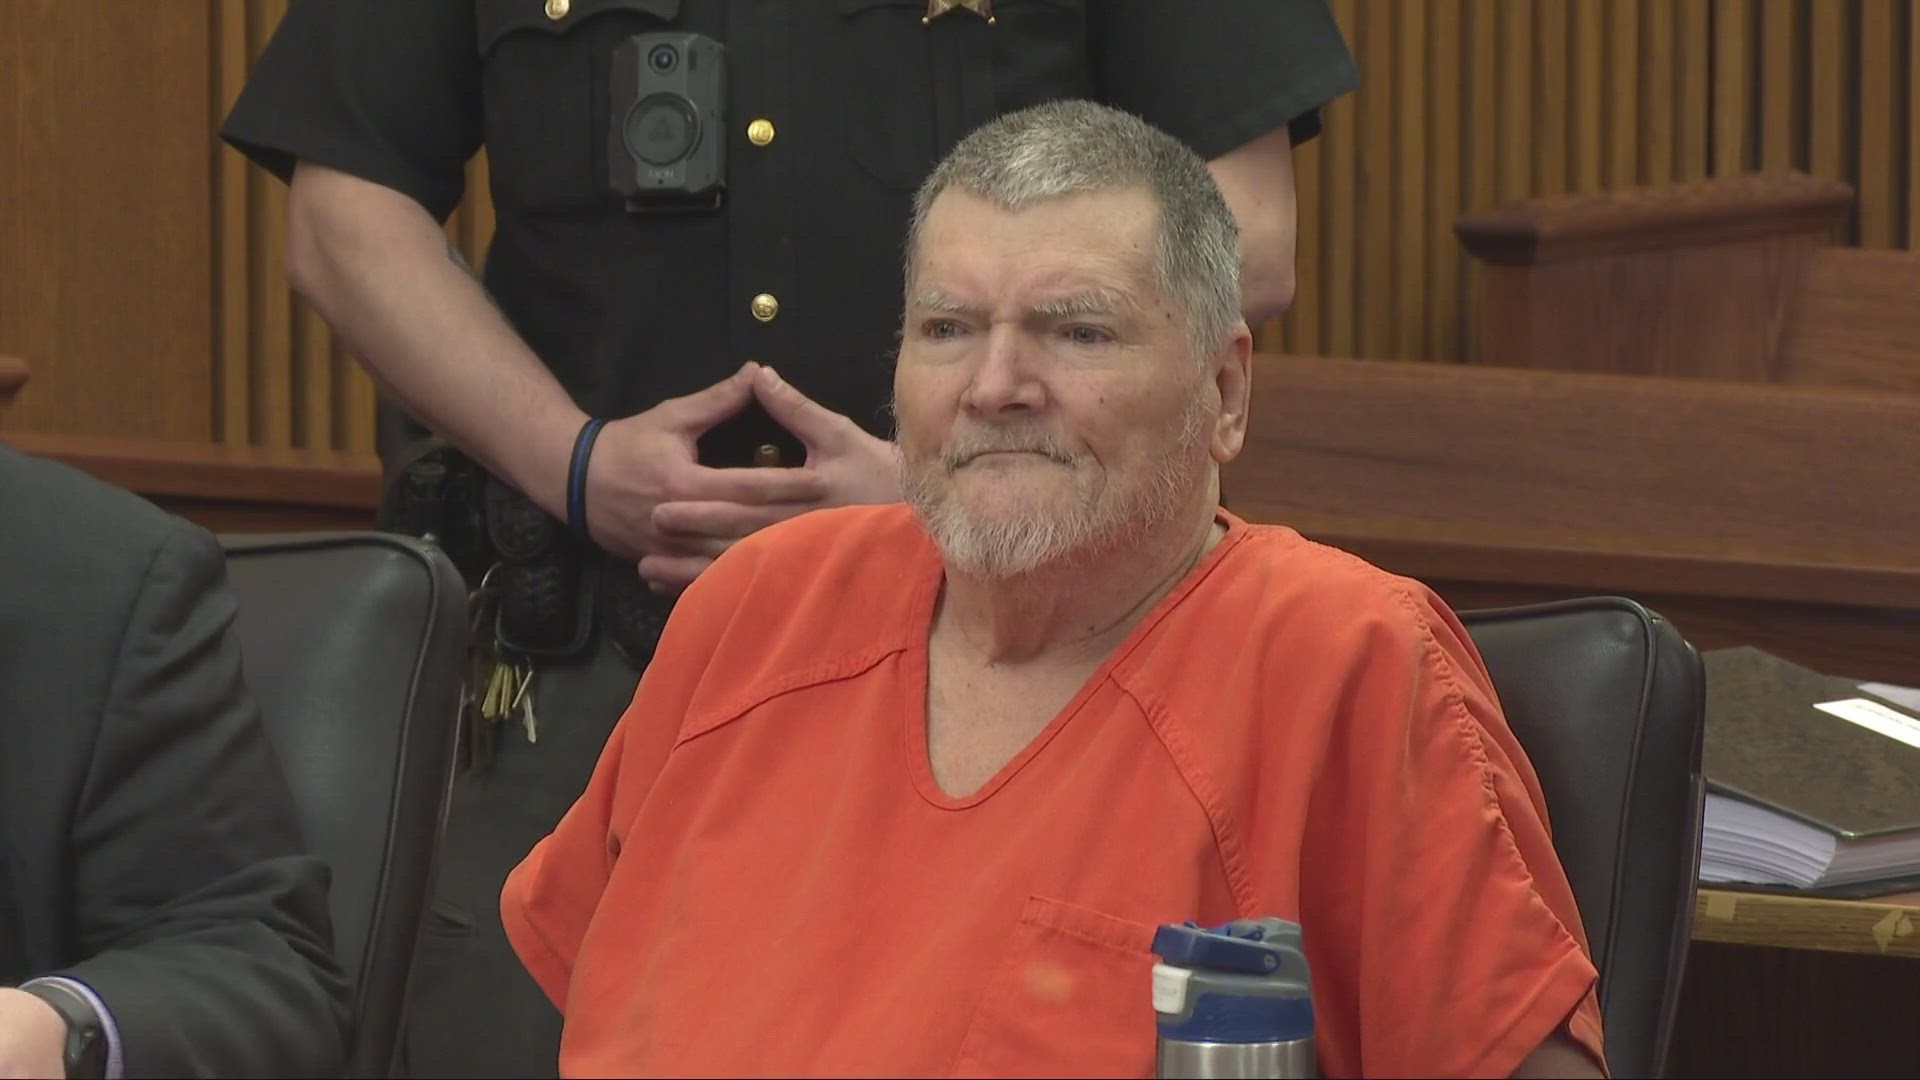 Dennis Gribble, 73, was sentenced to ten years in prison after DNA testing linked him to the 1997 rape of a 9-year-old boy in Brooklyn.